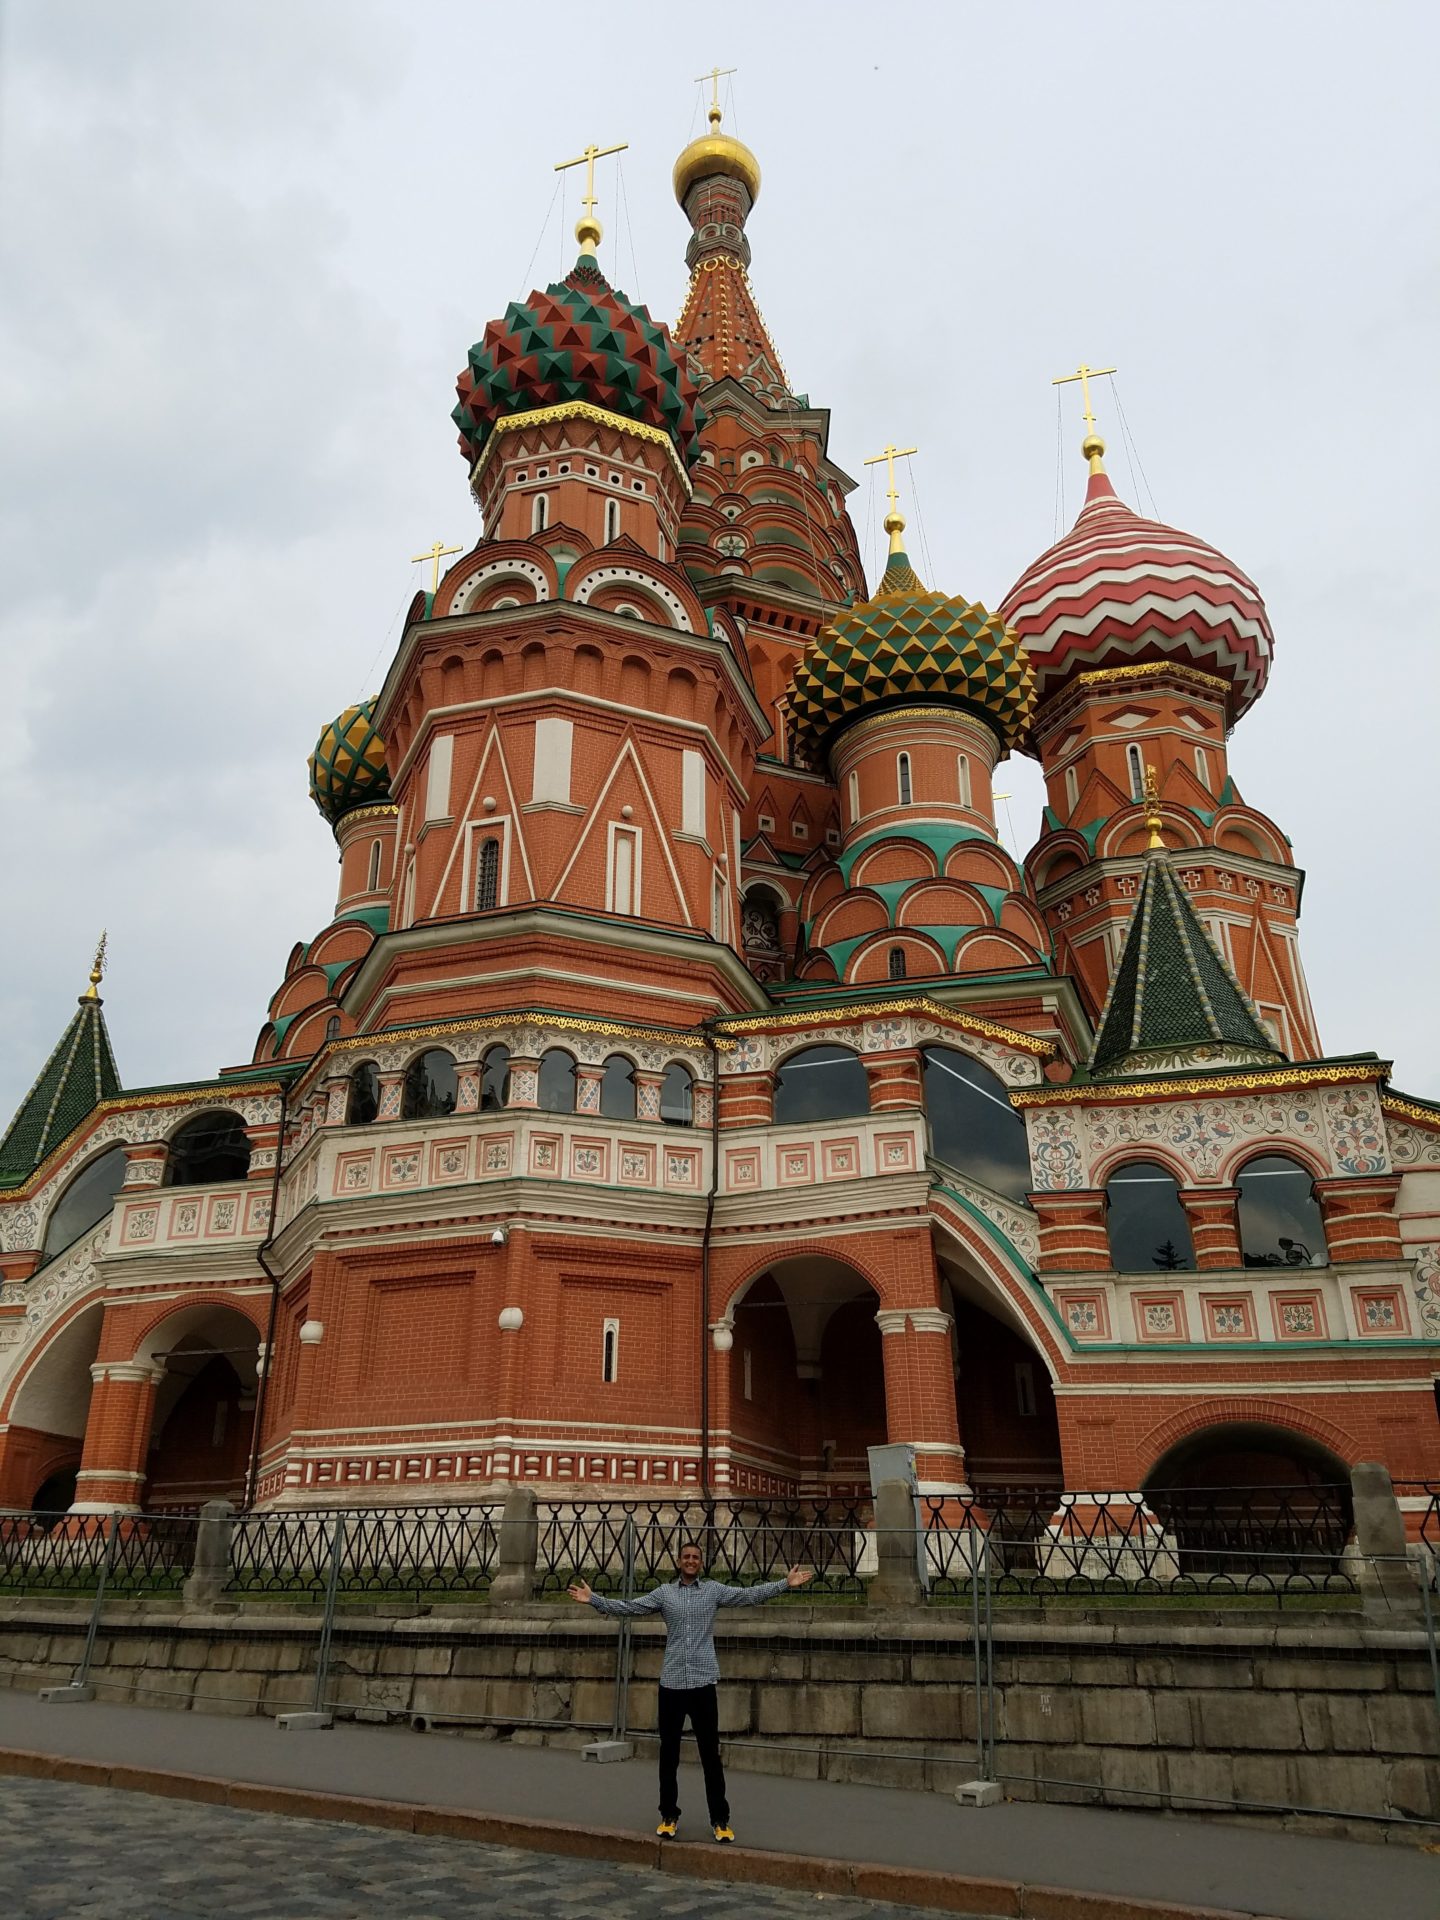 a building with colorful domes